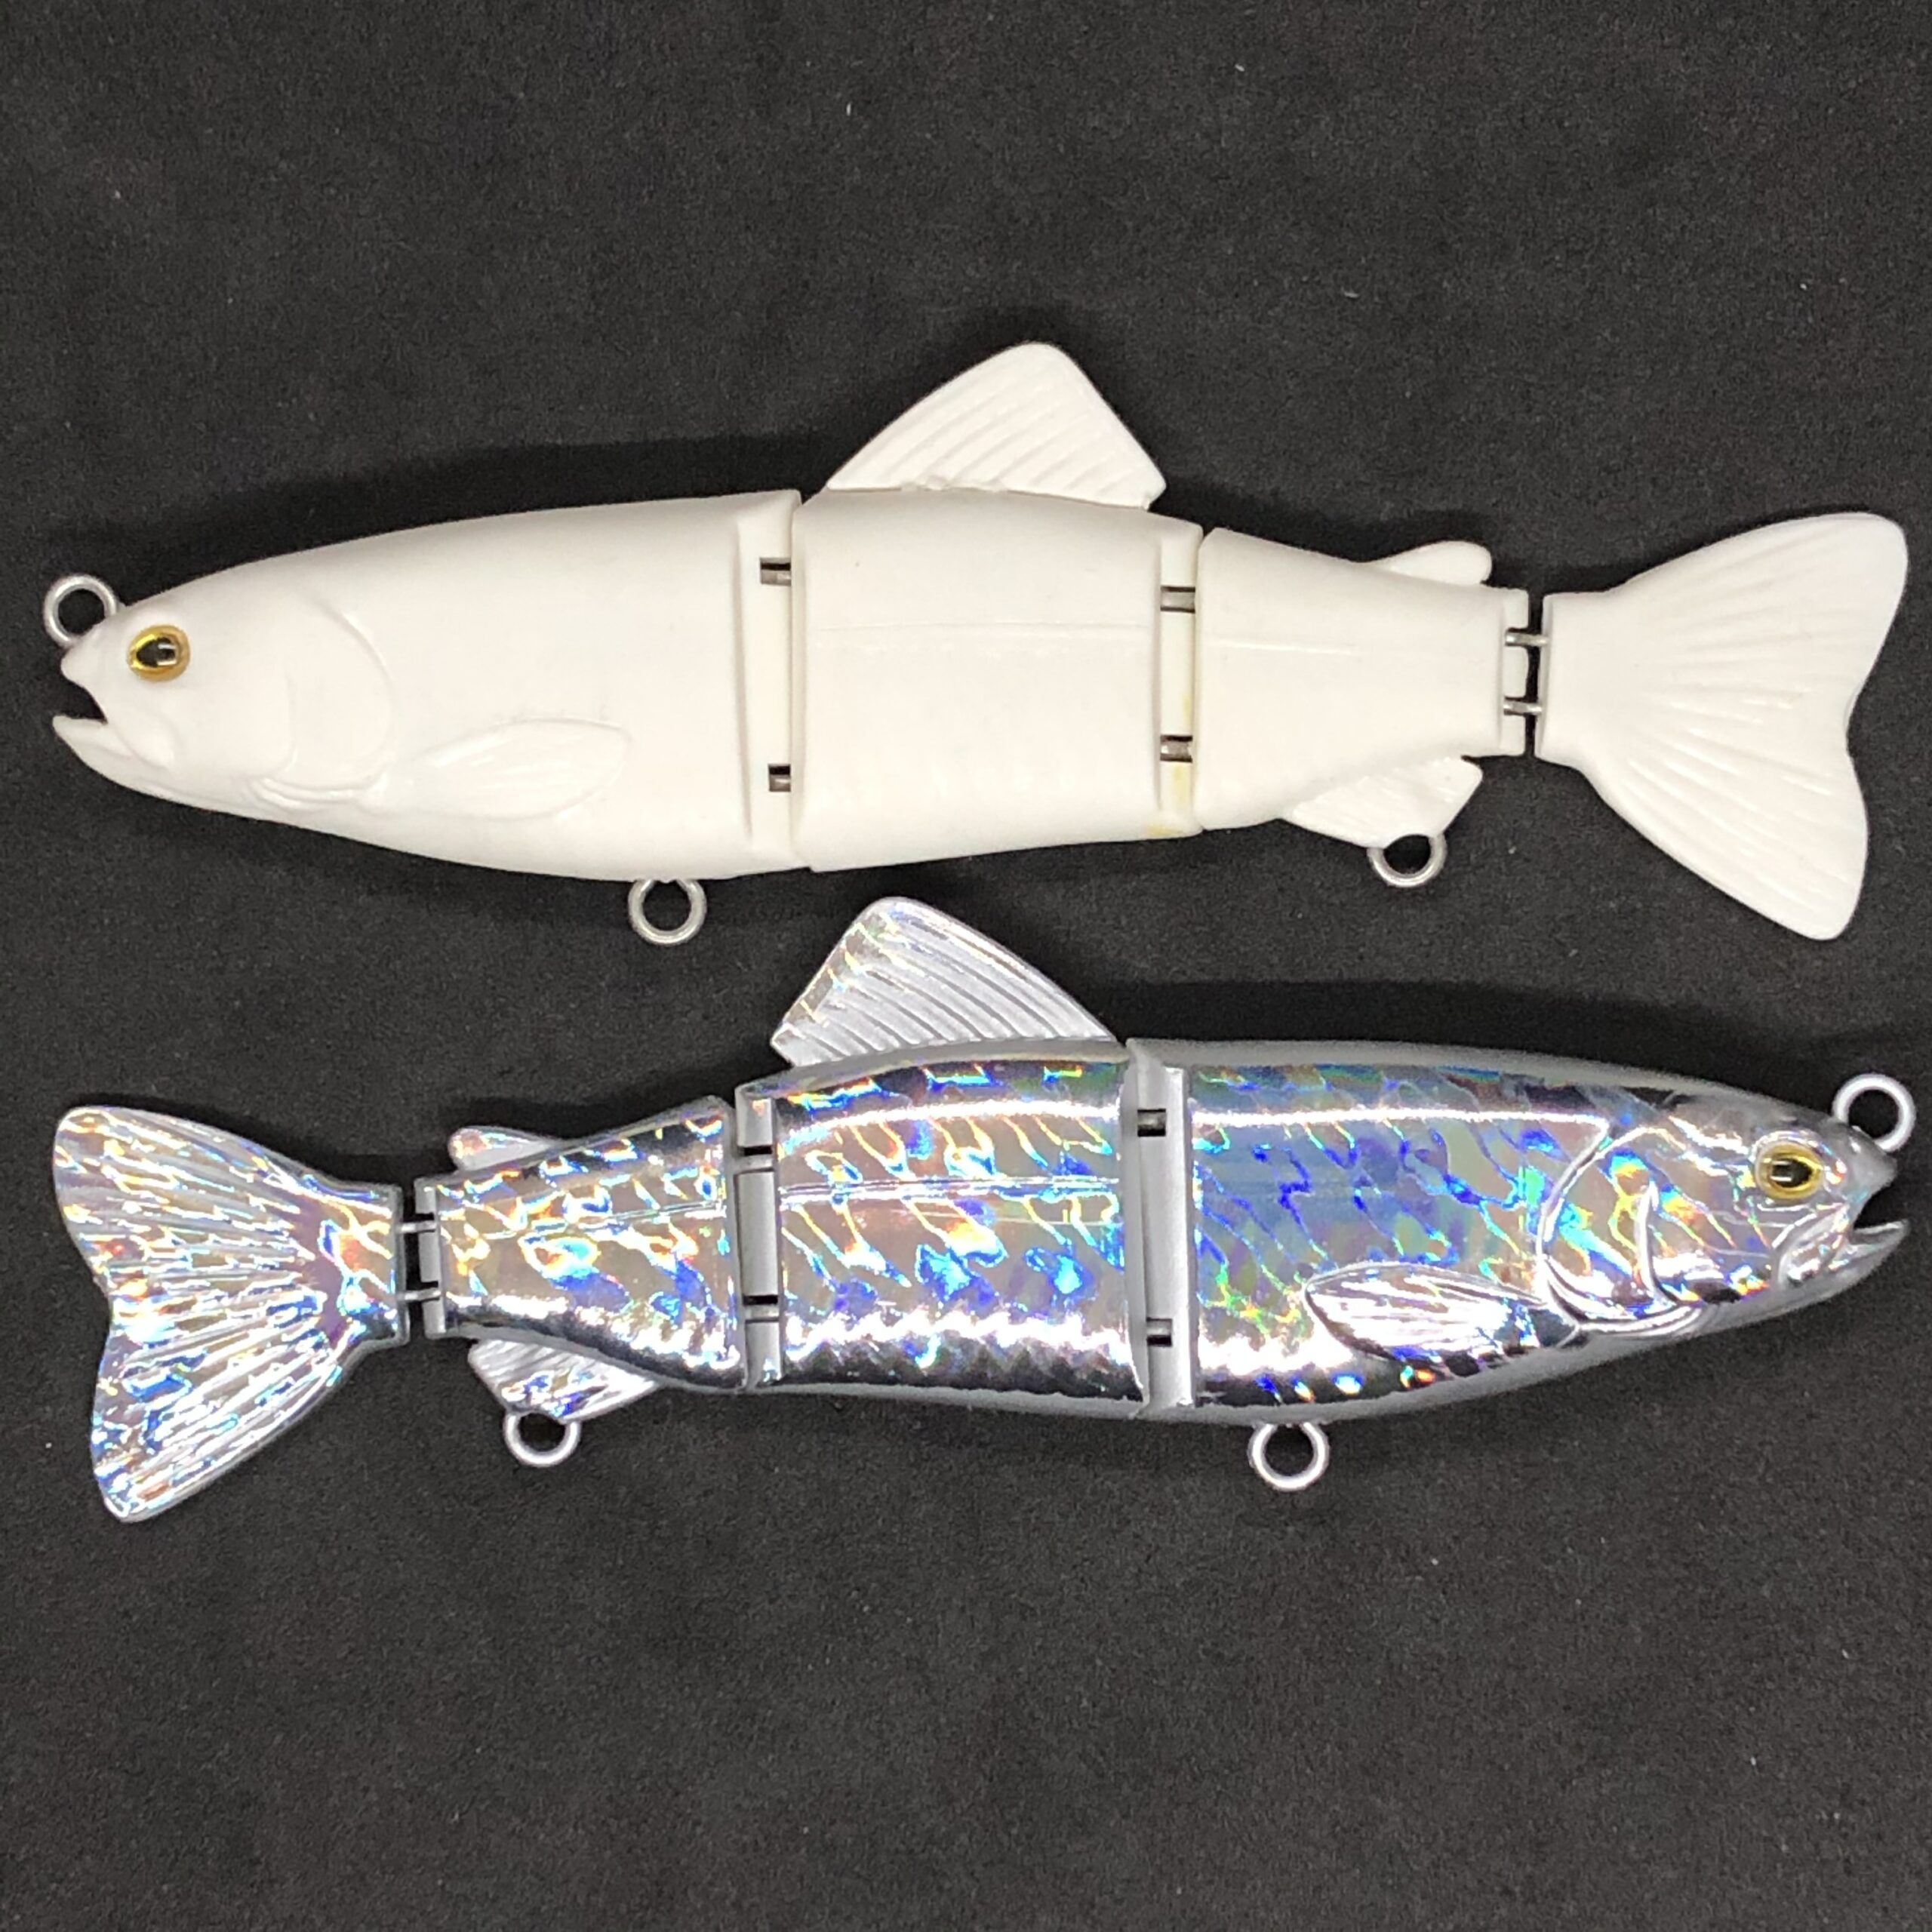 Flat Side Stocker Trout Swimbait (Specialty eyes included) –  Backwater.Outfitting